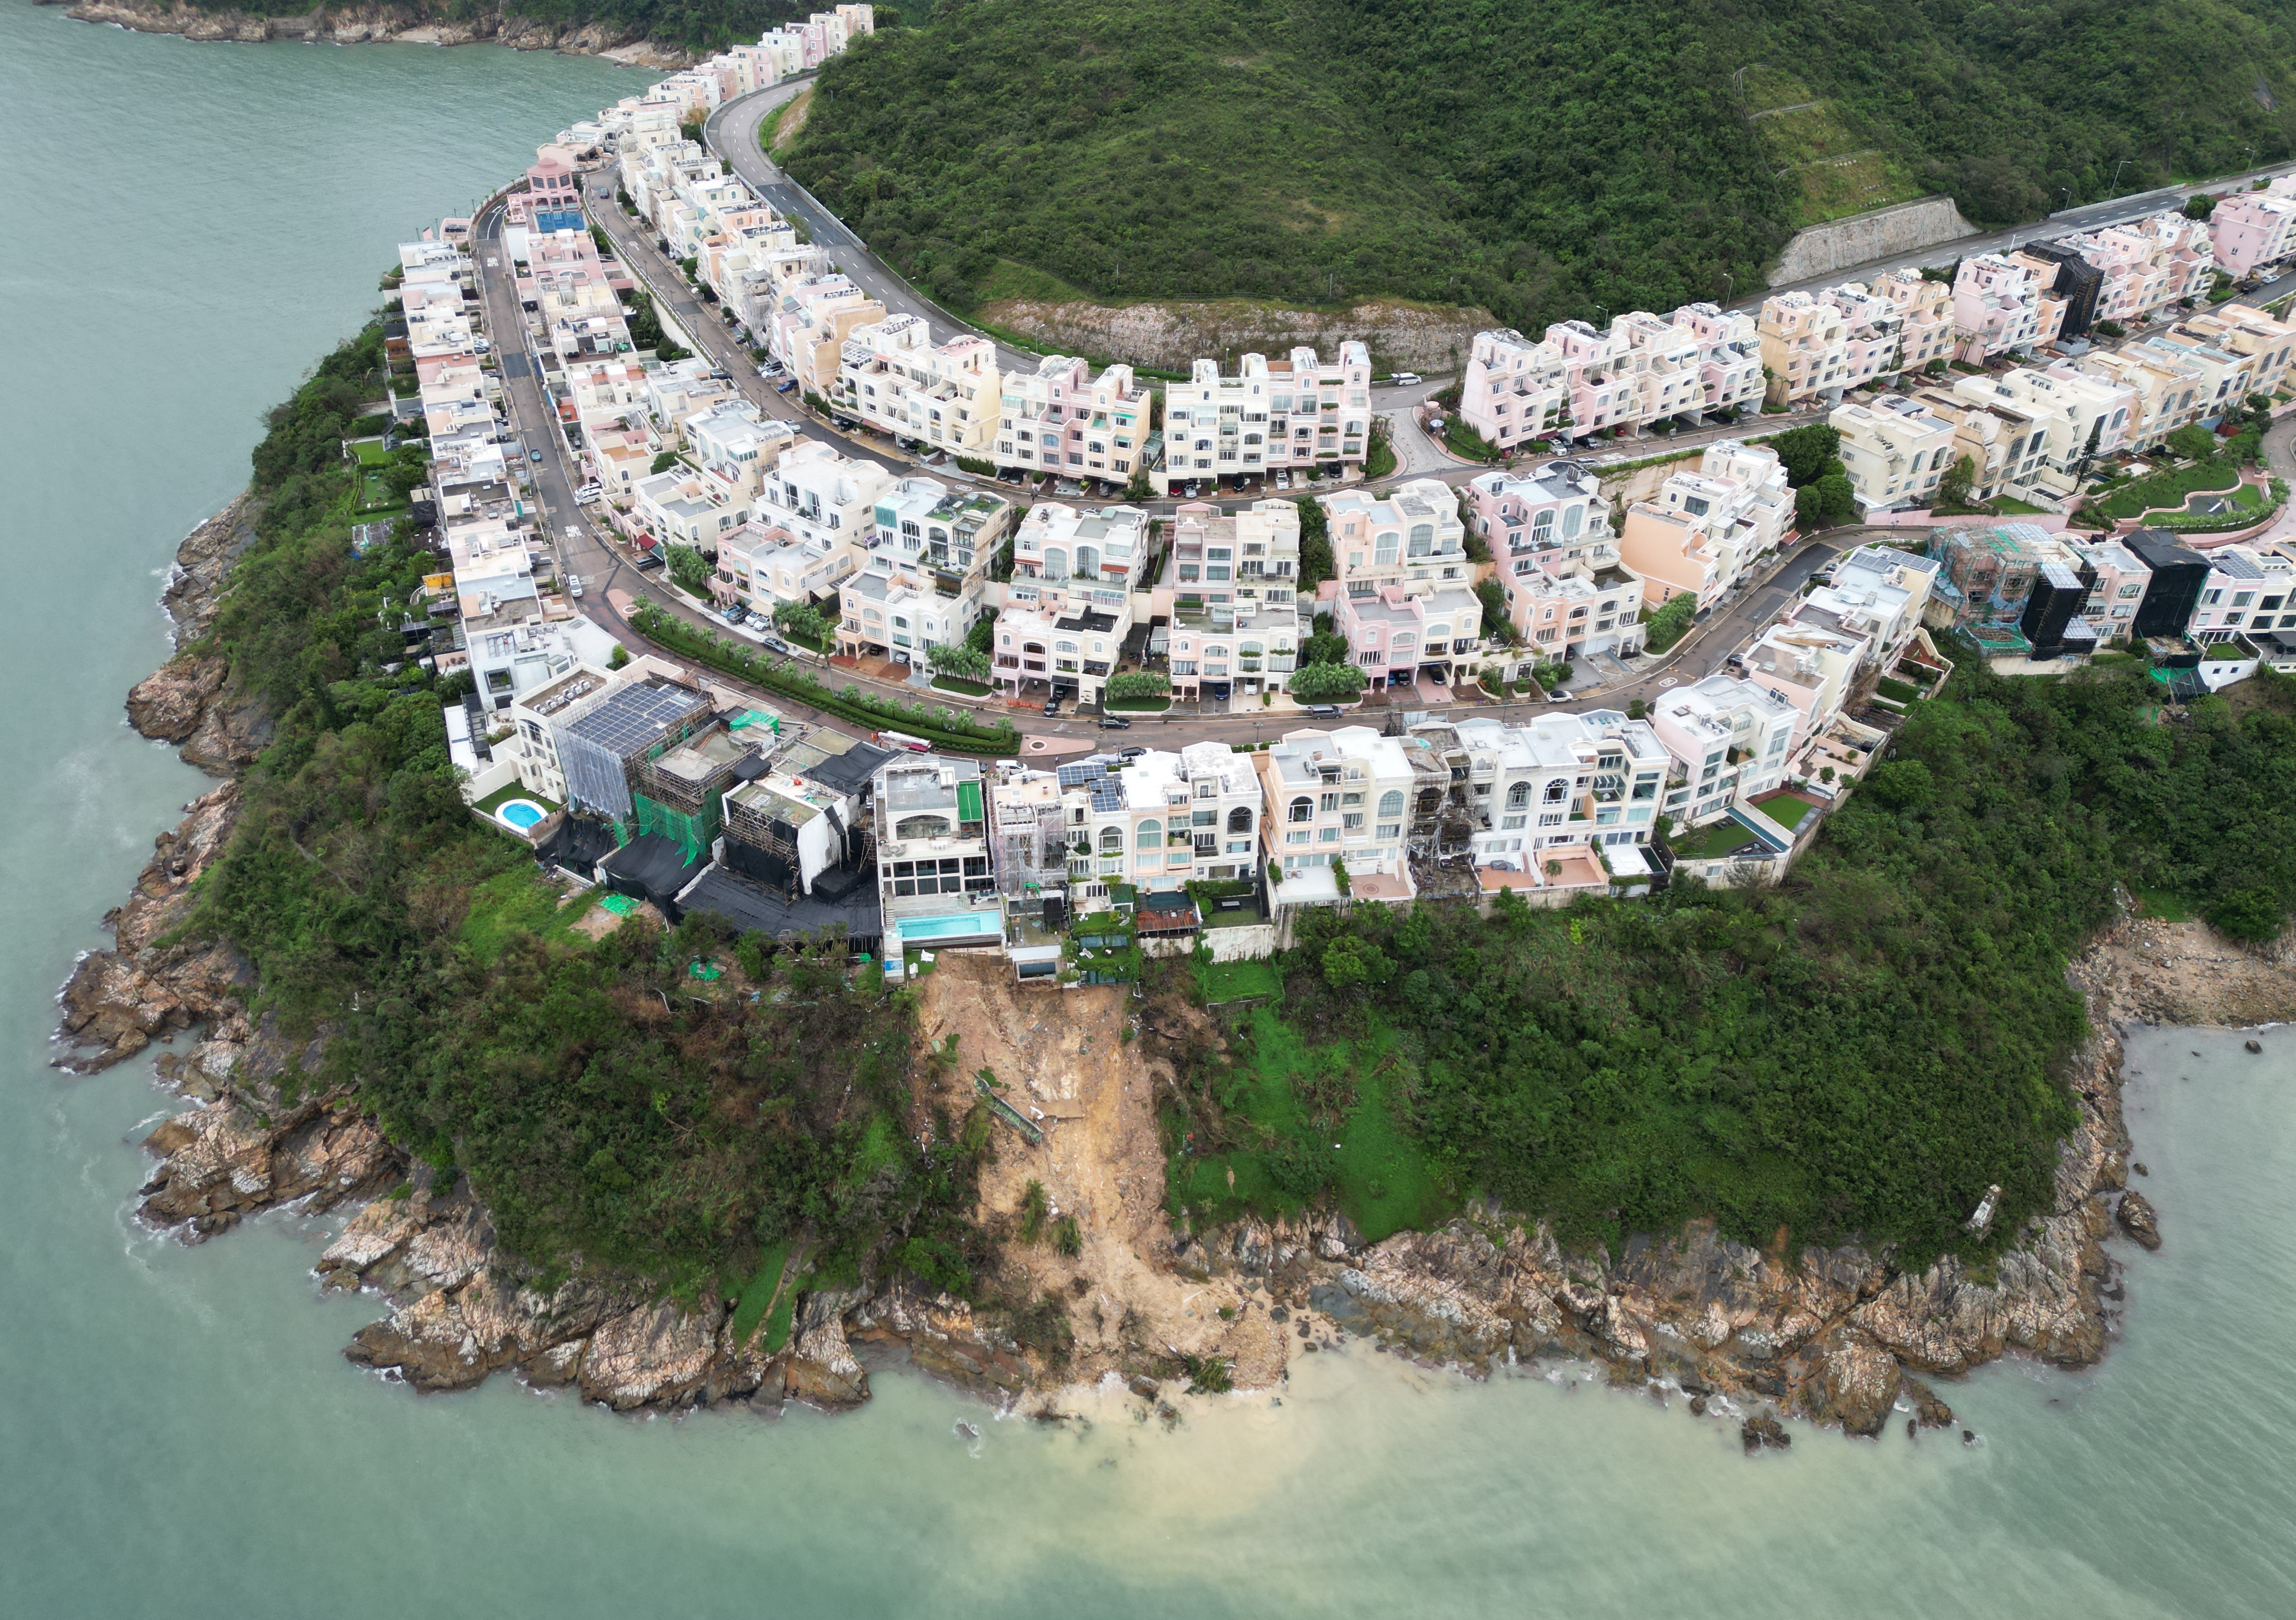 Redhill Peninsula in Tai Tam, Hong Kong was inspected after a major landslide. Photo: Dickson Lee